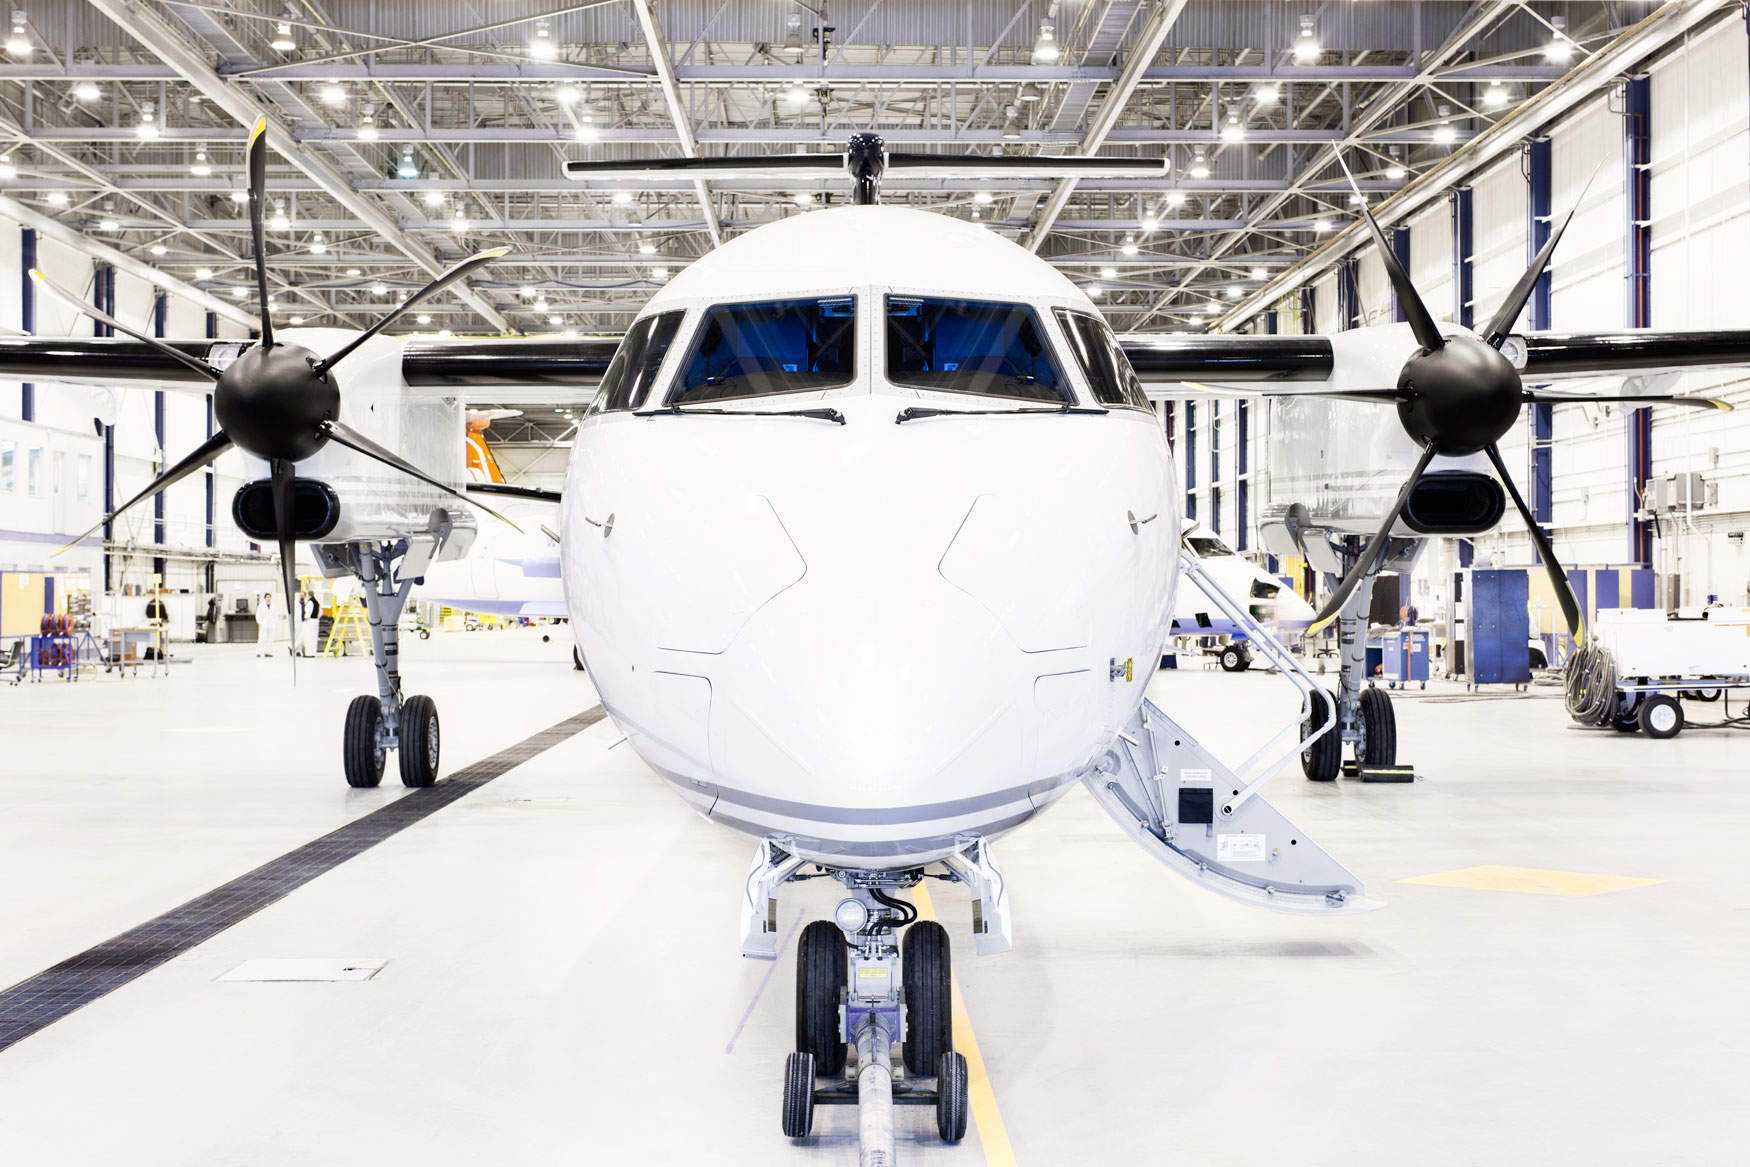 Bombardier, Toronto, Client: Porter Airlines, Winkreative